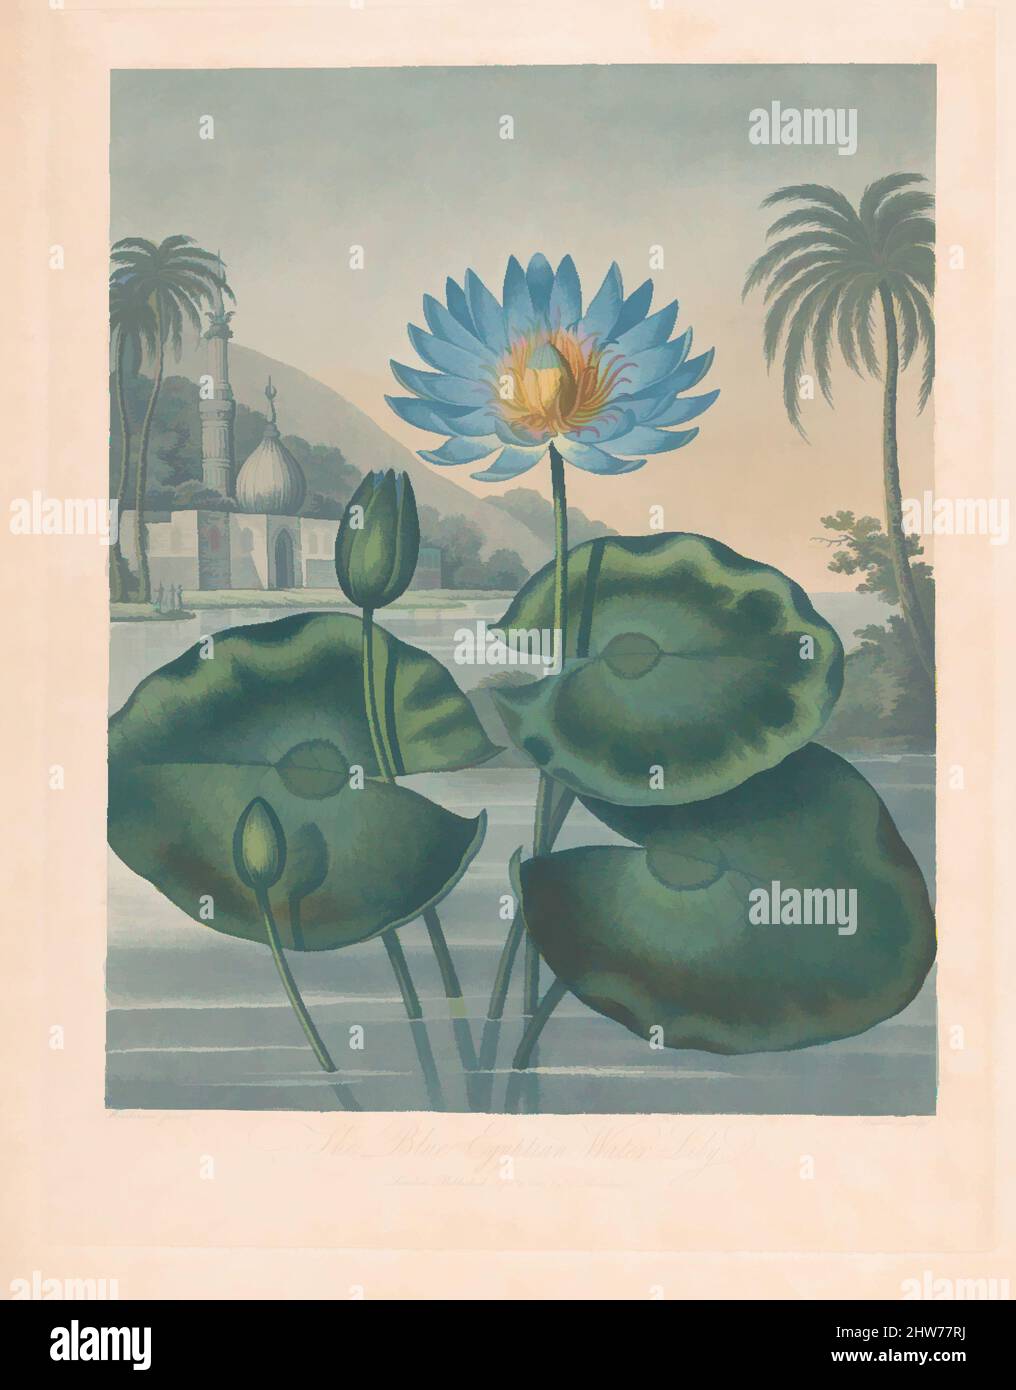 Art inspired by The Blue Egyptian Water Lily, from 'The Temple of Flora, or Garden of Nature', September 11, 1804, Aquatint and stipple engraving printed in colors with hand coloring, Image: 17 1/8 x 14 in. (43.5 x 35.6 cm), Prints, After Peter Charles Henderson (British, active 1791–, Classic works modernized by Artotop with a splash of modernity. Shapes, color and value, eye-catching visual impact on art. Emotions through freedom of artworks in a contemporary way. A timeless message pursuing a wildly creative new direction. Artists turning to the digital medium and creating the Artotop NFT Stock Photo